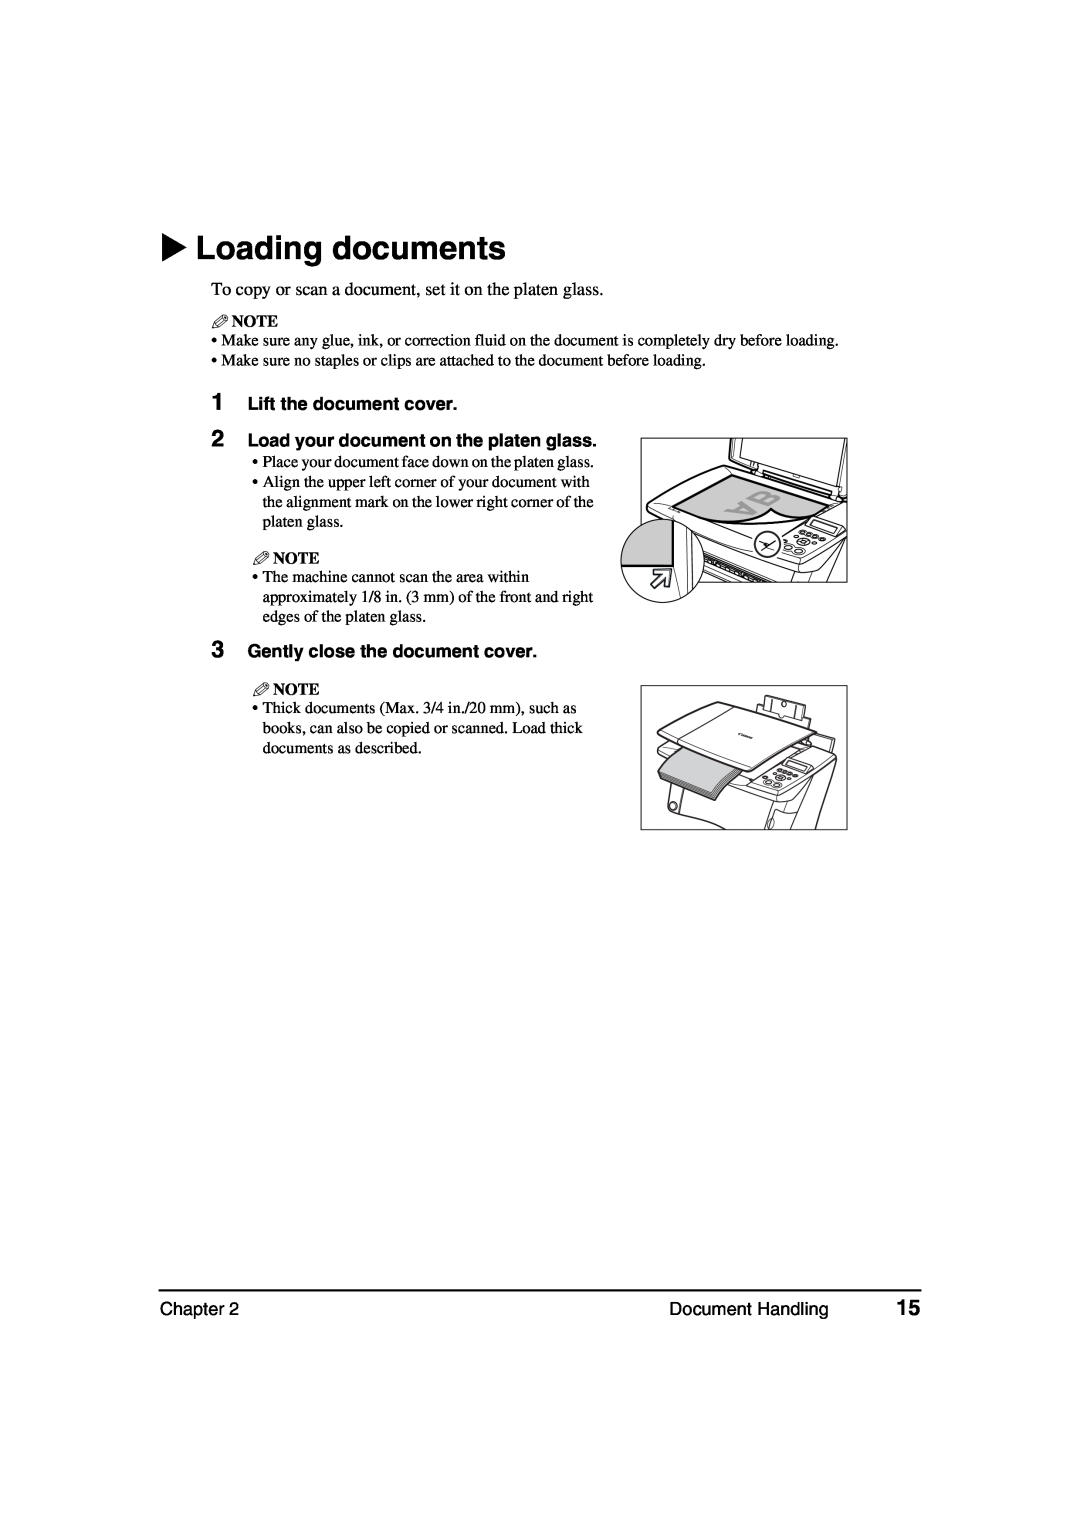 Canon MP370 Loading documents, Lift the document cover Load your document on the platen glass, Chapter, Document Handling 